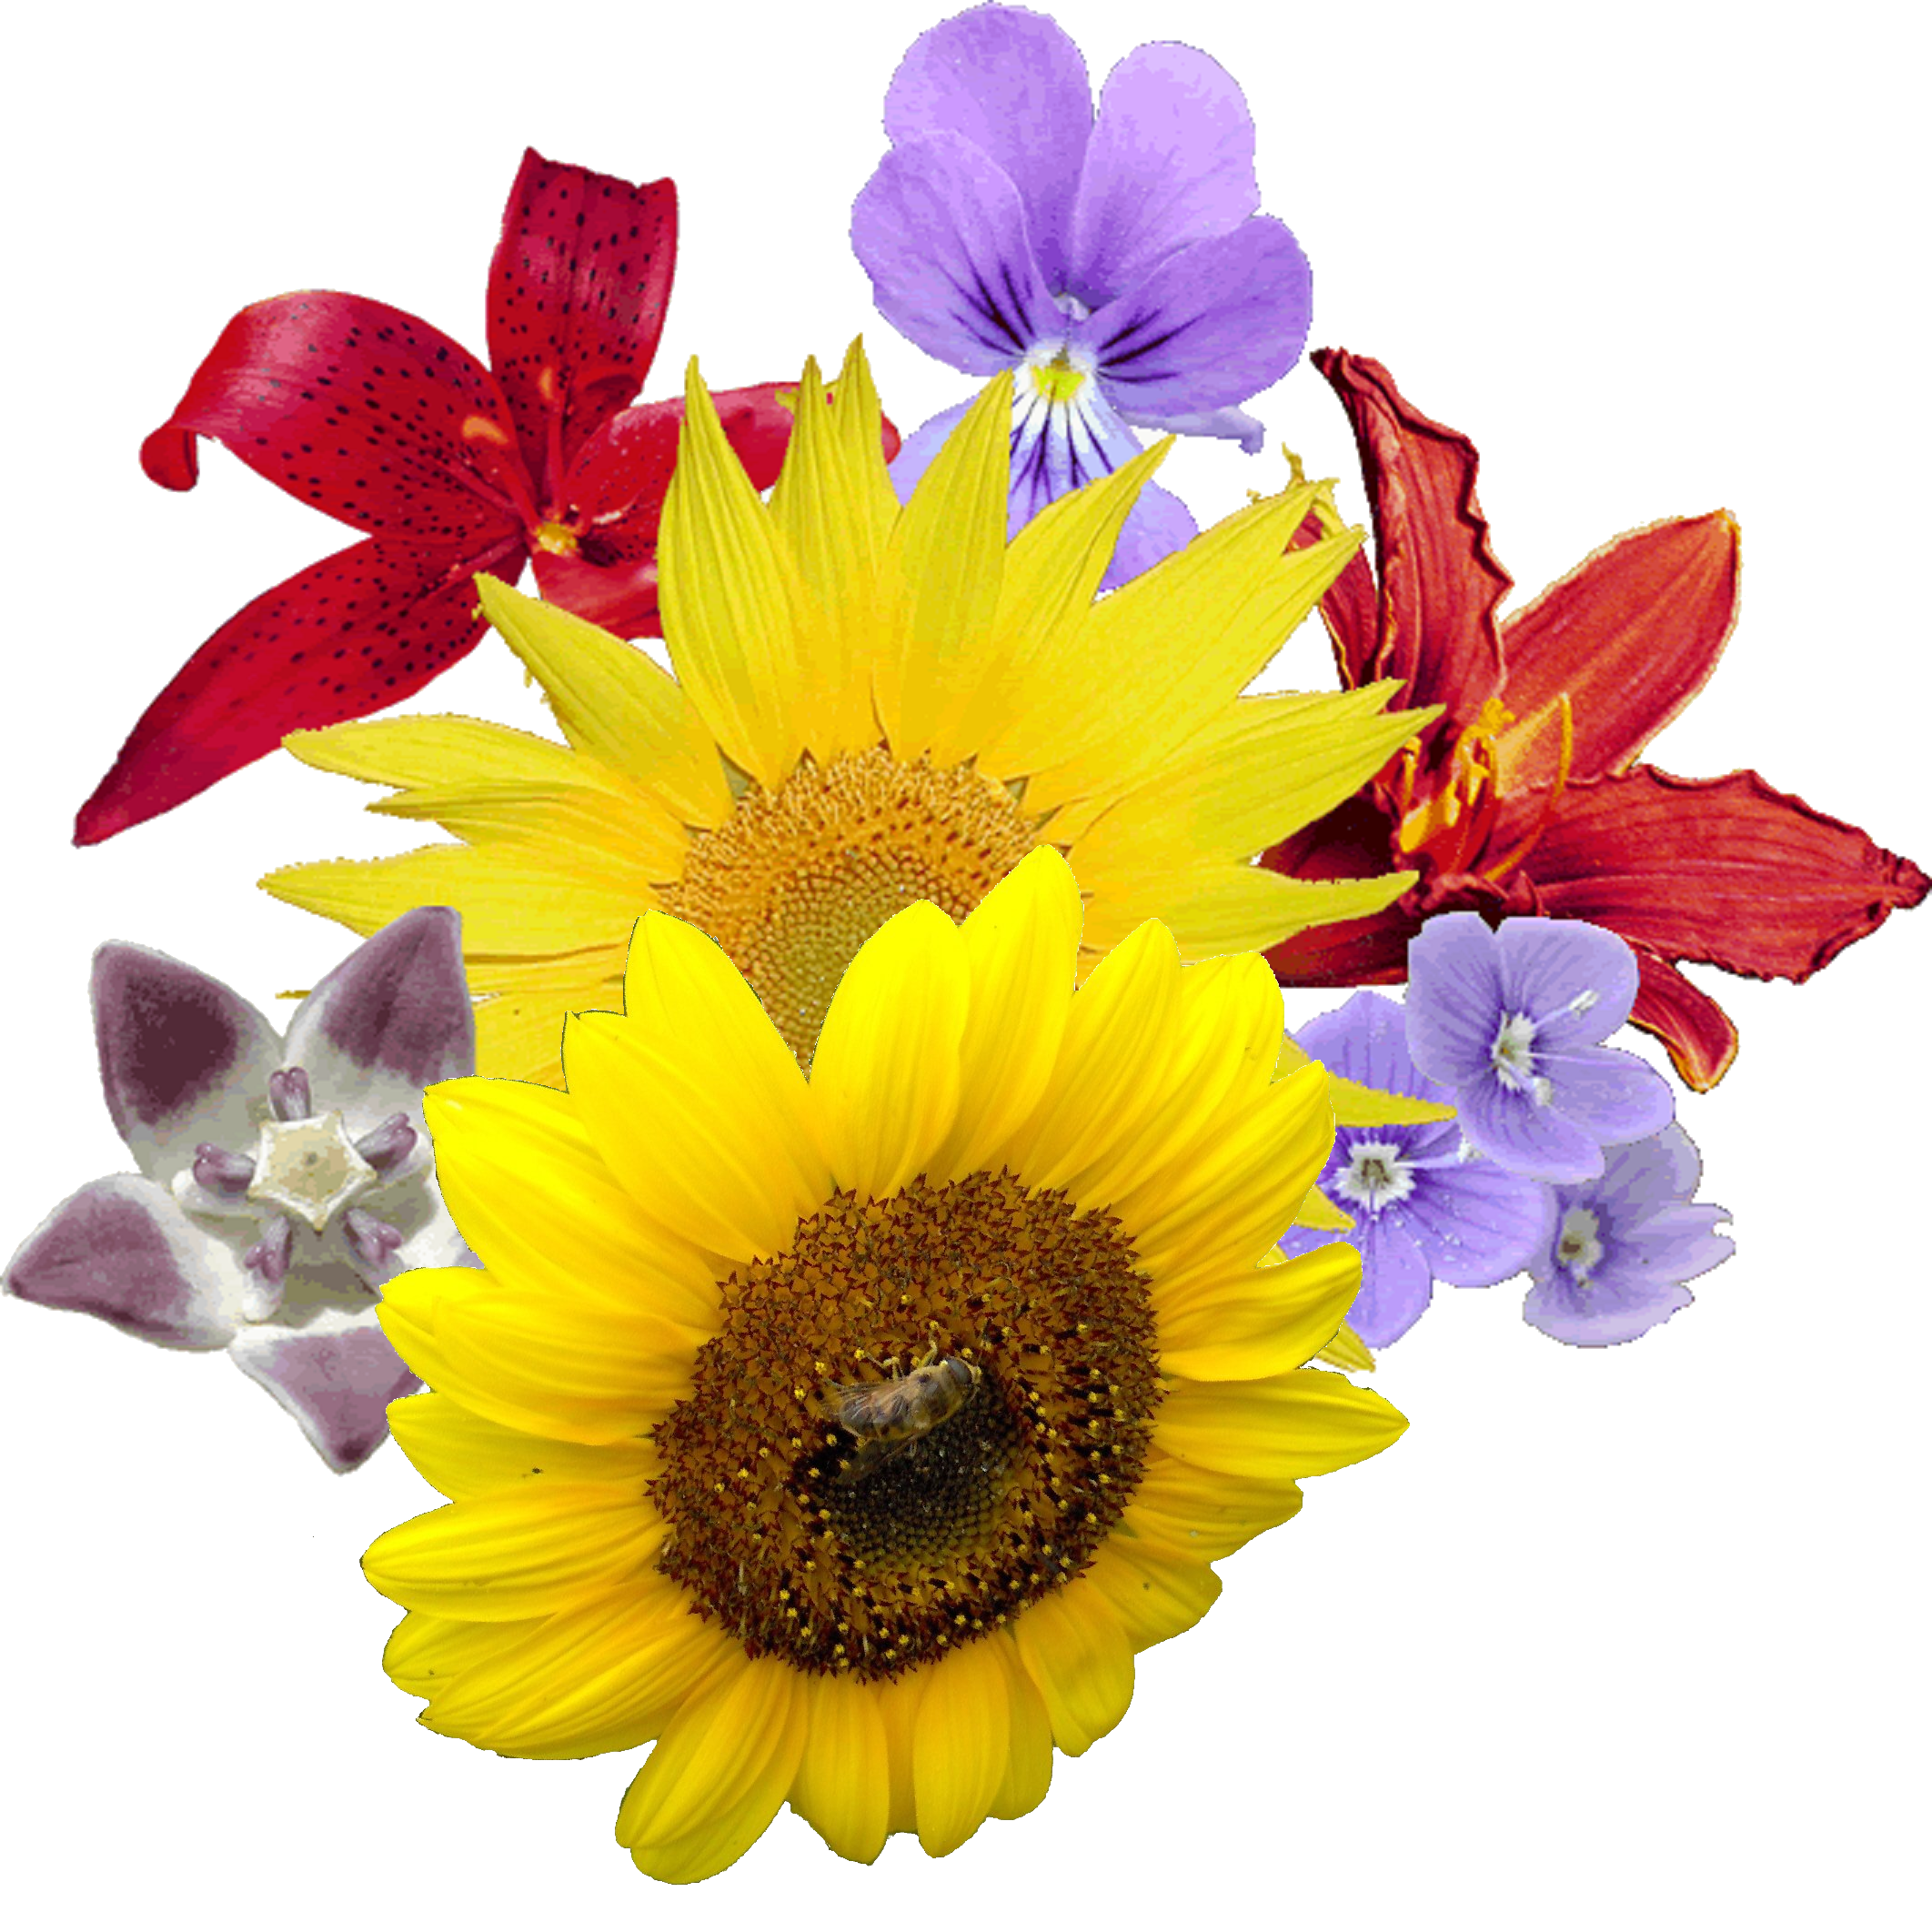 Download Download Yellow Flowers Bouquet Image HQ PNG Image | FreePNGImg